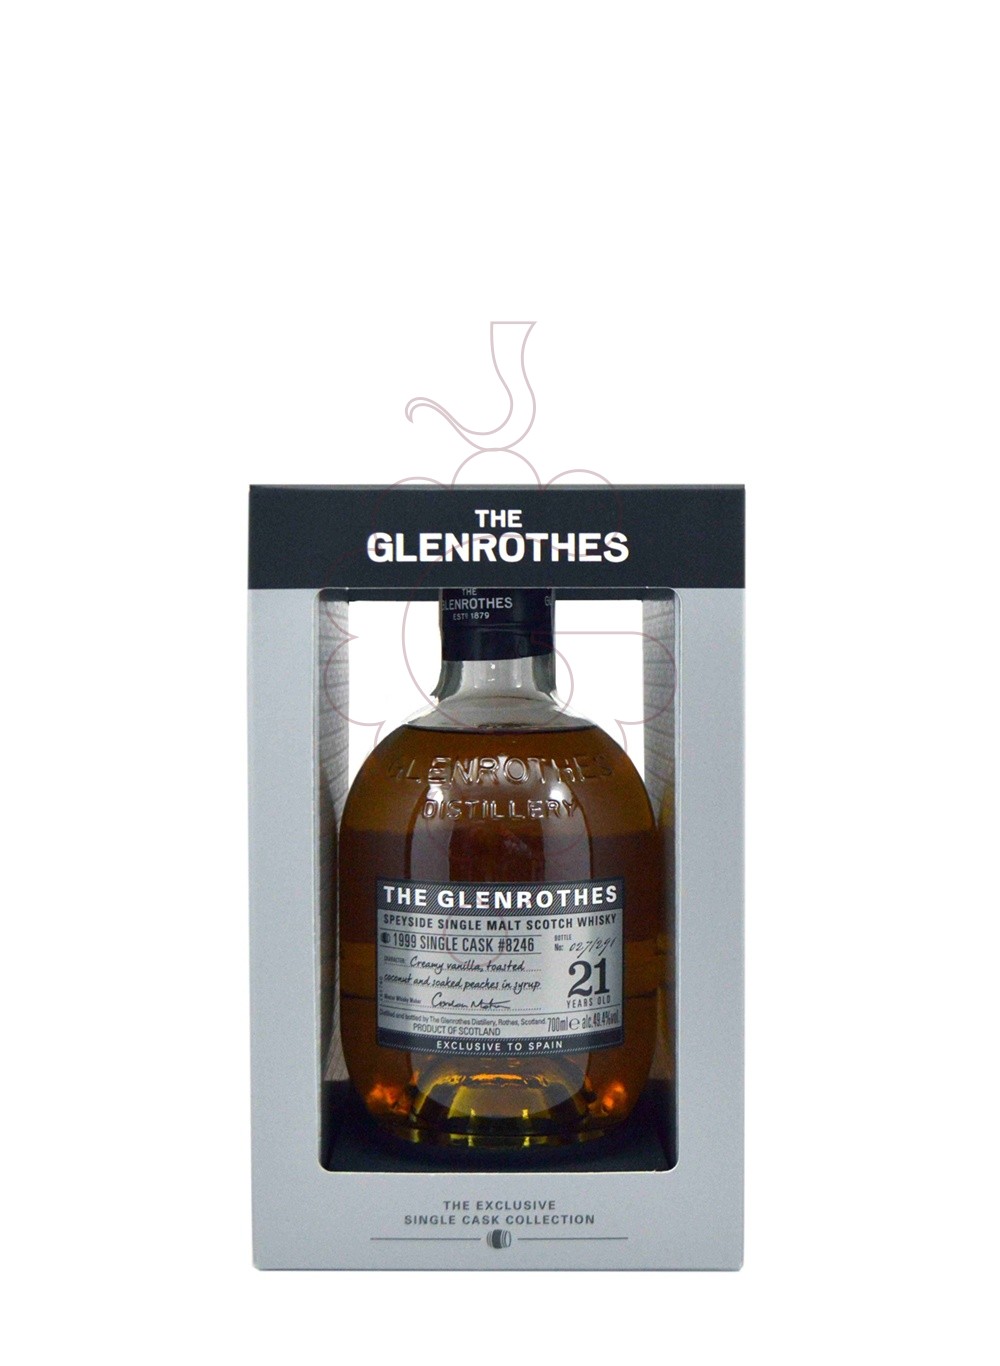 Foto Whisky Glen rothes 21 anys 70 cl